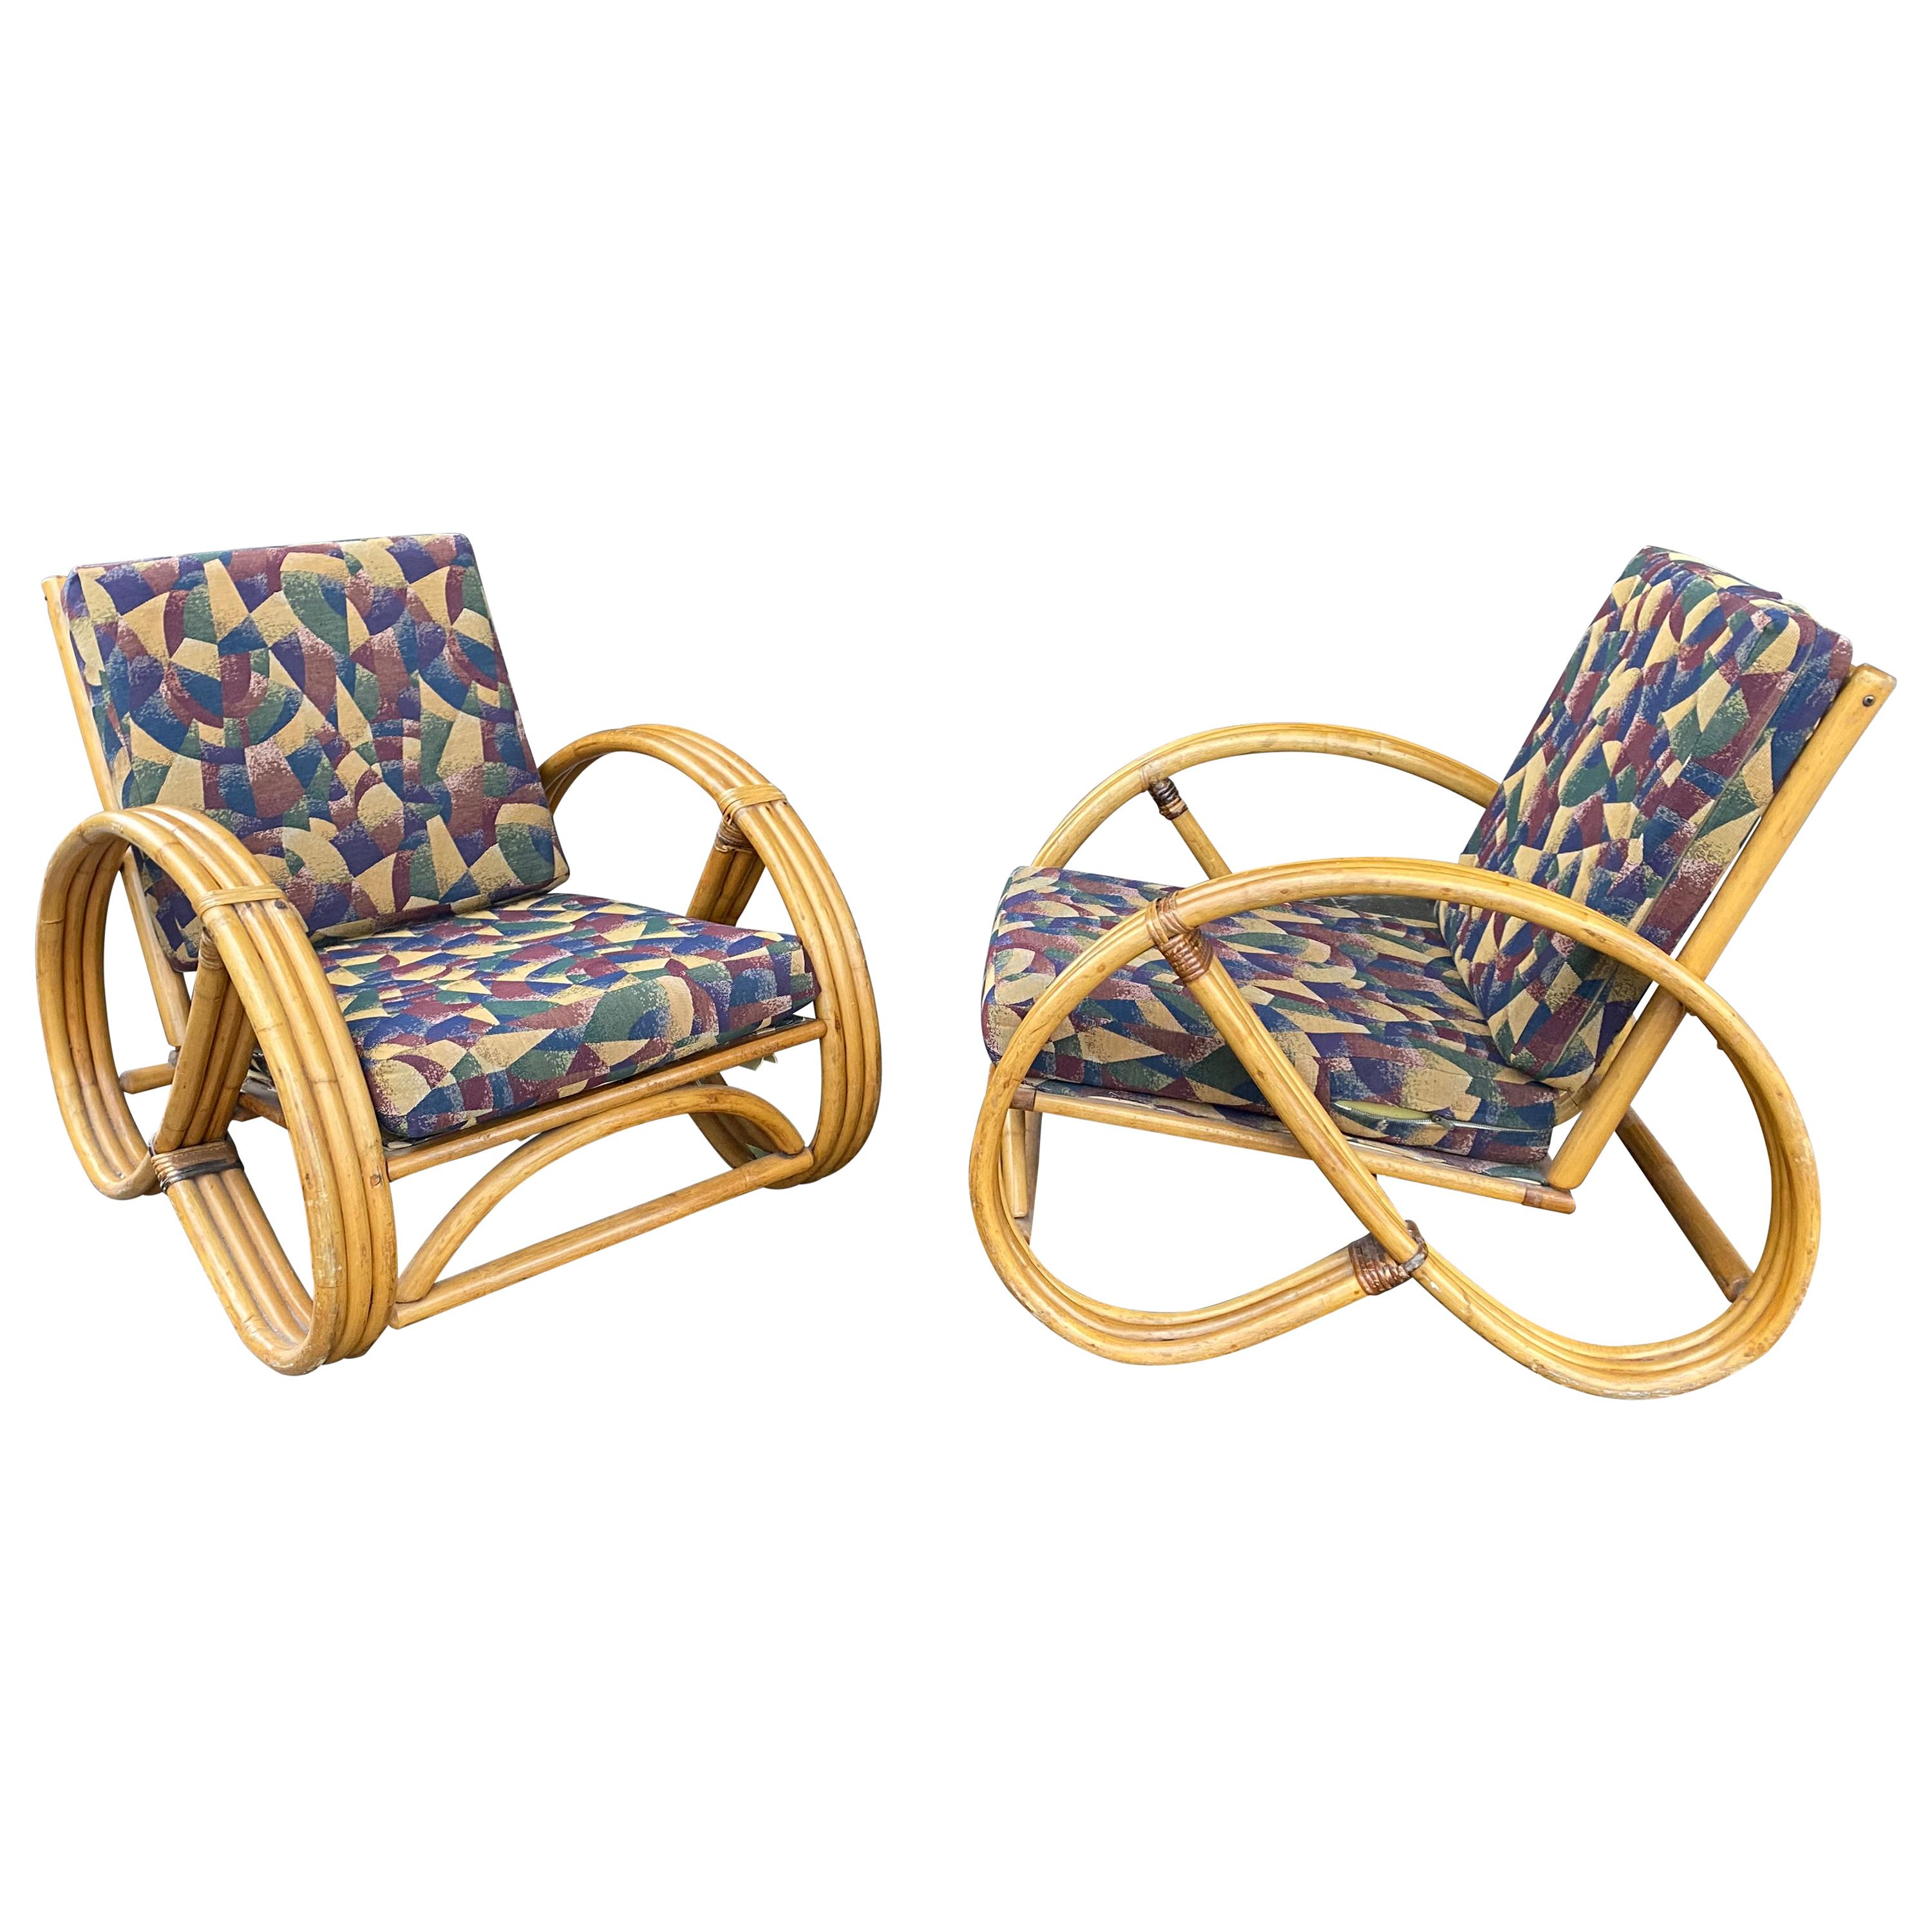 Pair of Bamboo Art Deco Pretzel Lounge Chairs Attributed to Paul Frankl